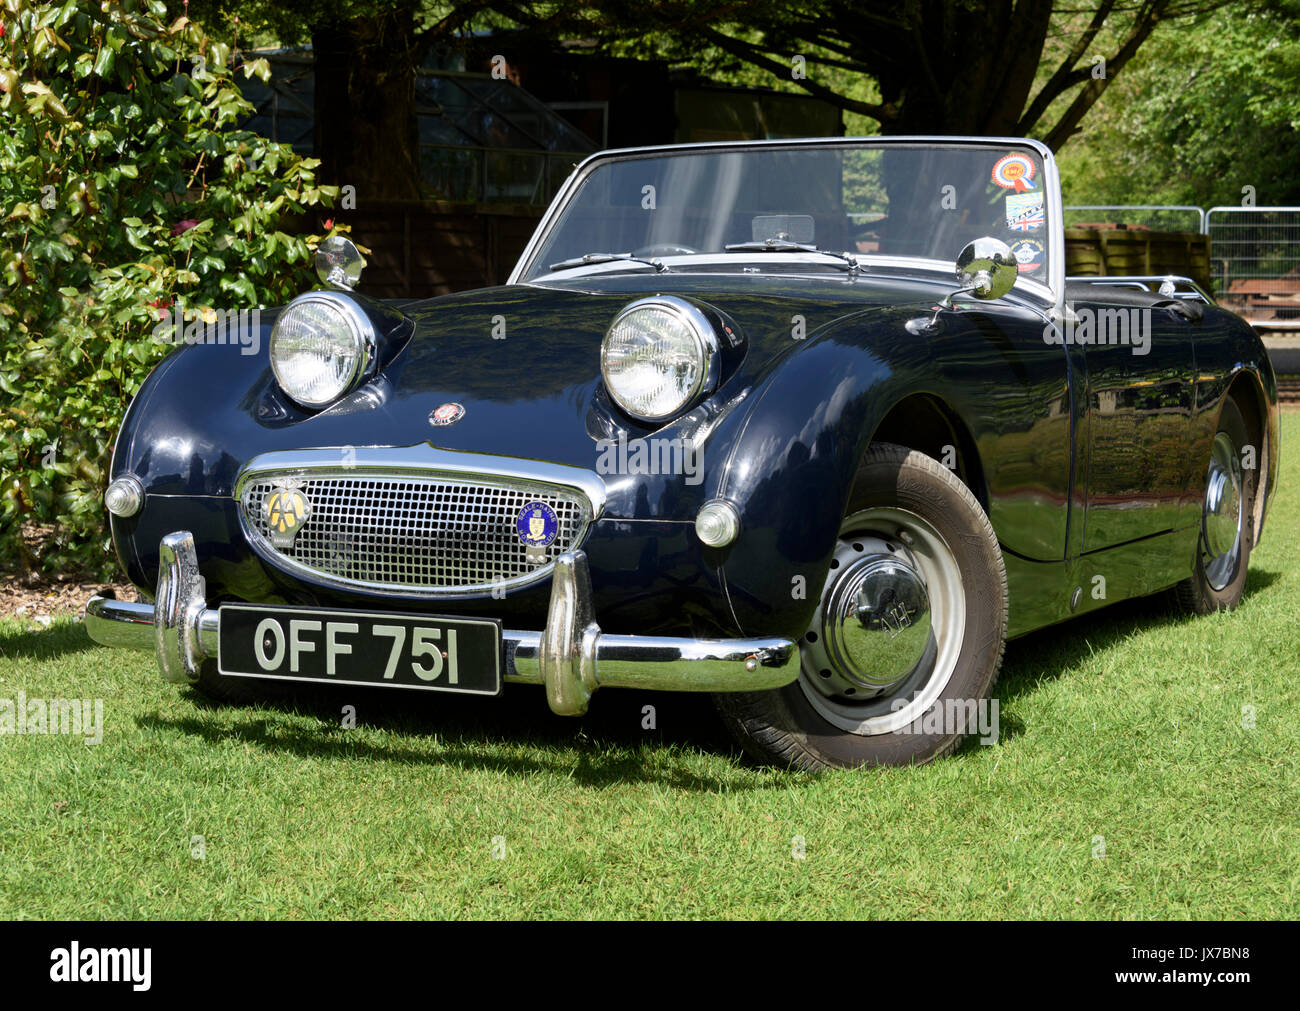 Low-angle, front three quarter view of an Austin-Healey Sprite Mark I on display in a garden setting Stock Photo